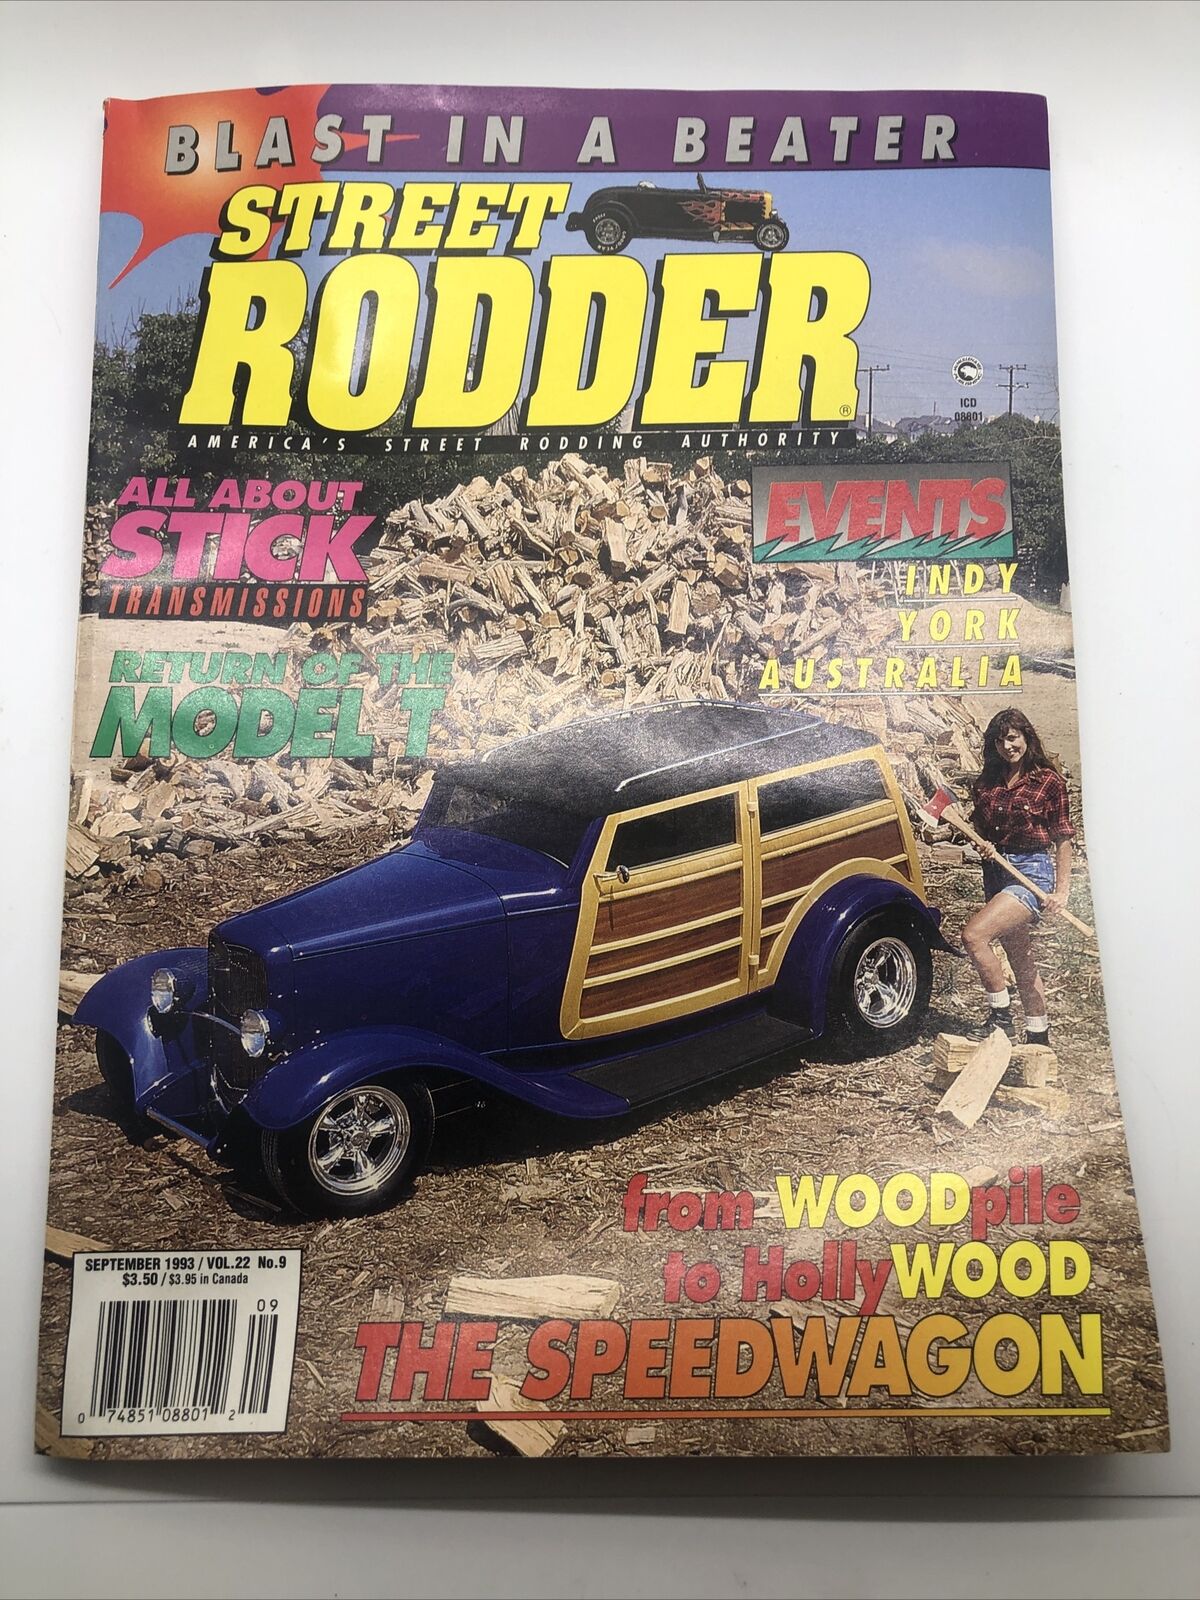 STREET RODDER 1993 SEPT - SETTING UP A HTP MIG 160, 3-SPEED TO 6-SPEED SWAP